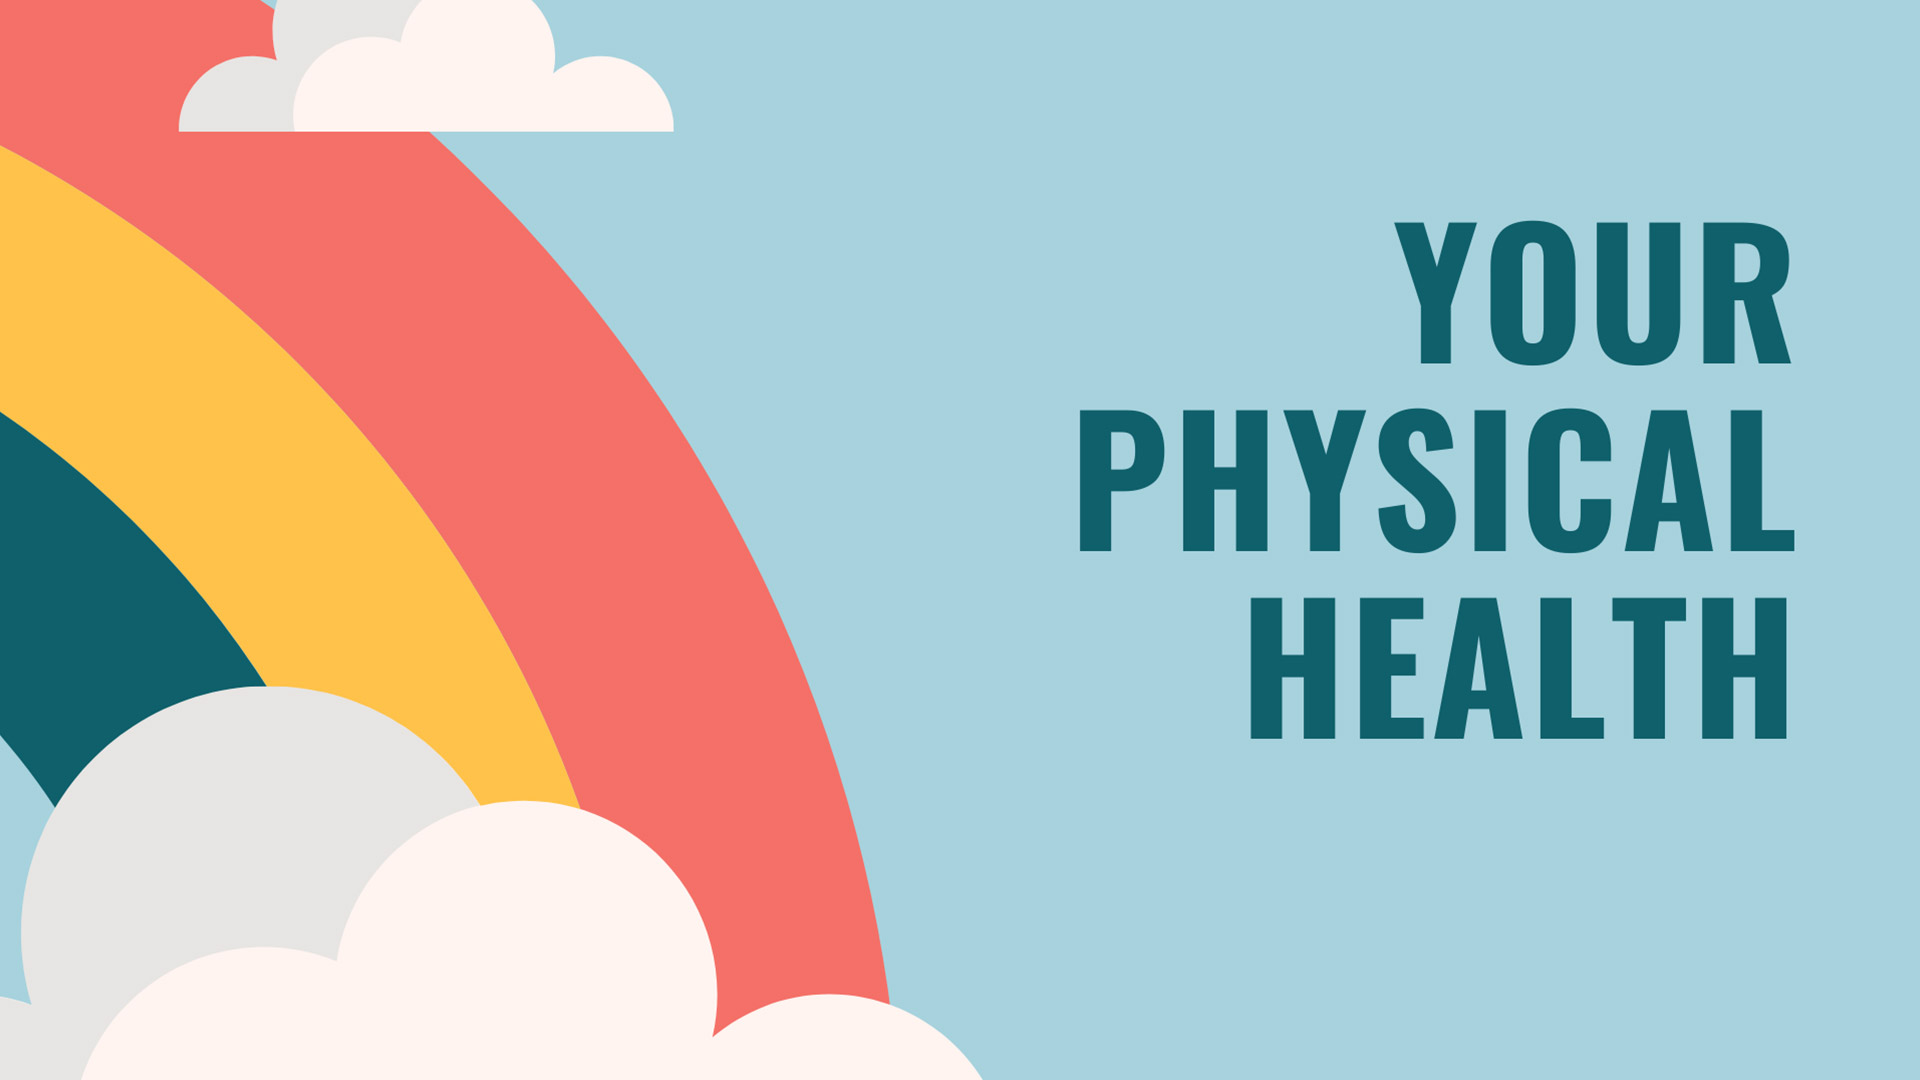 Your physical health text banner